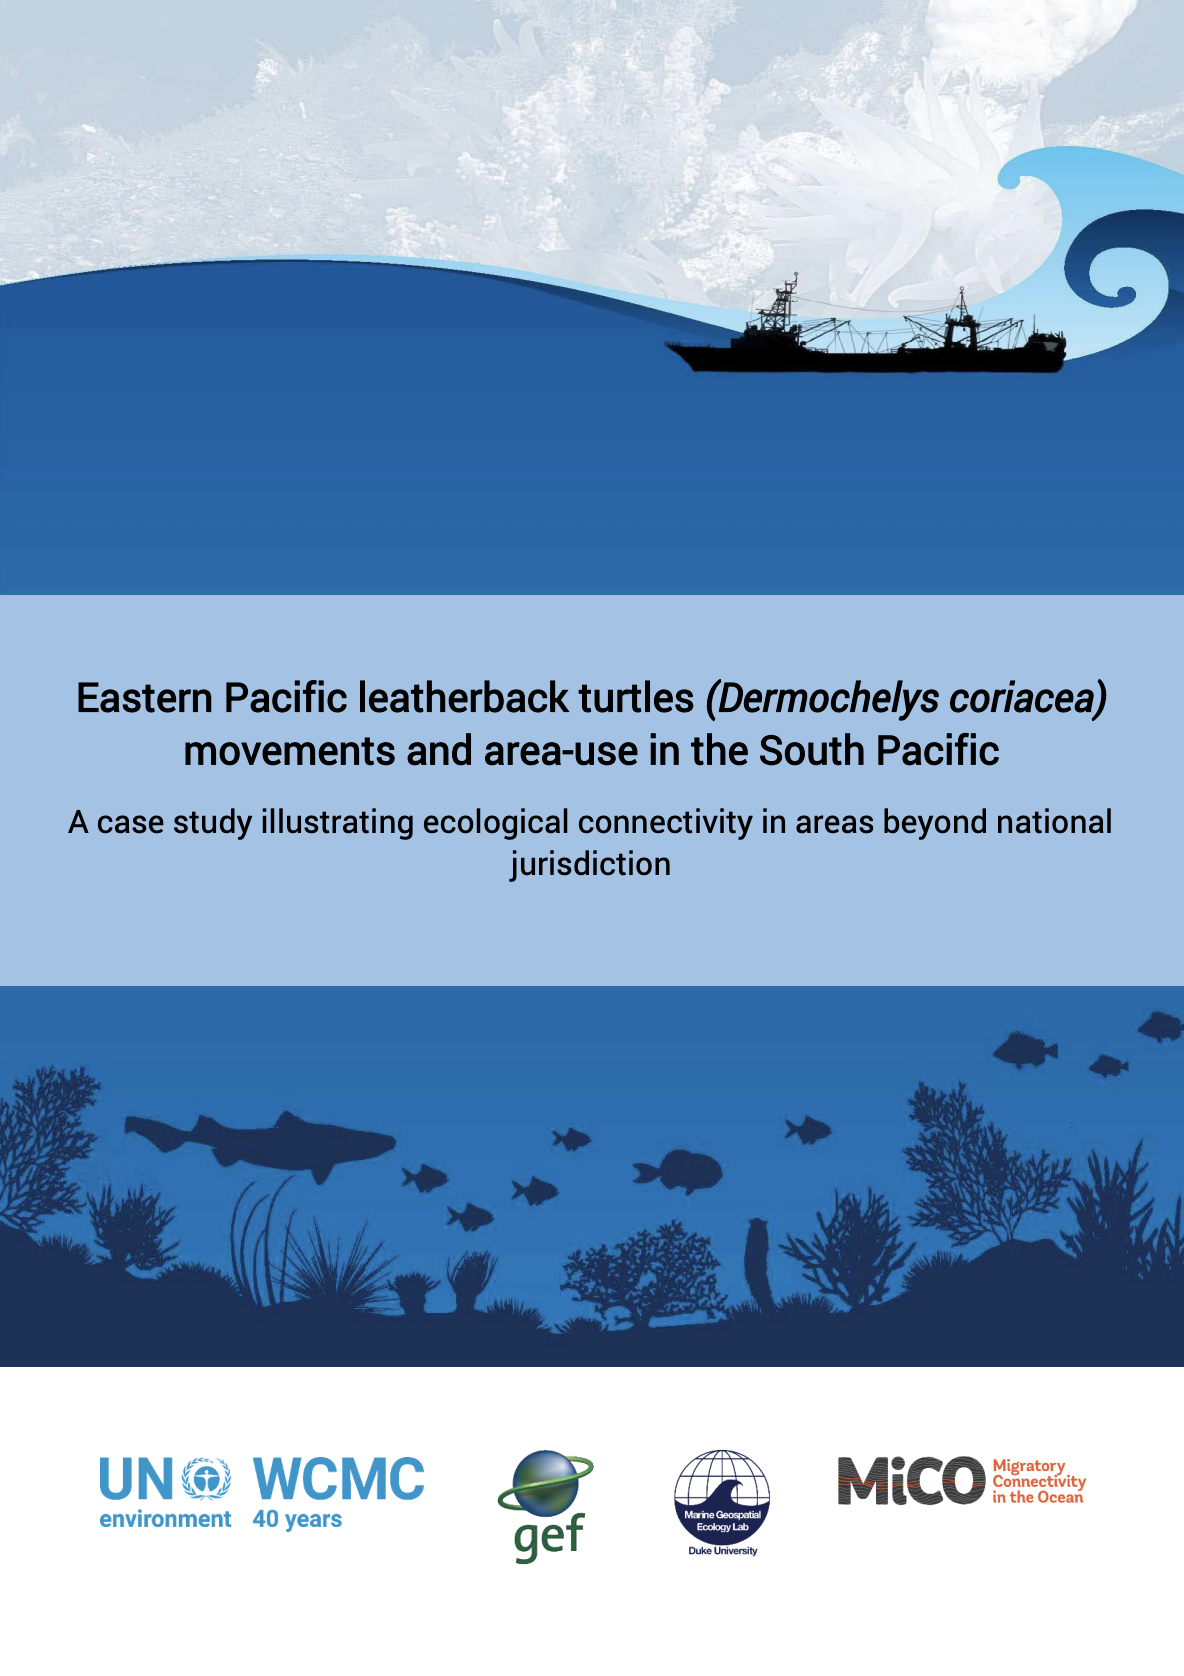 Eastern Pacific leatherback turtles (Dermochelys coriacea) movements and area-use in the South Pacific